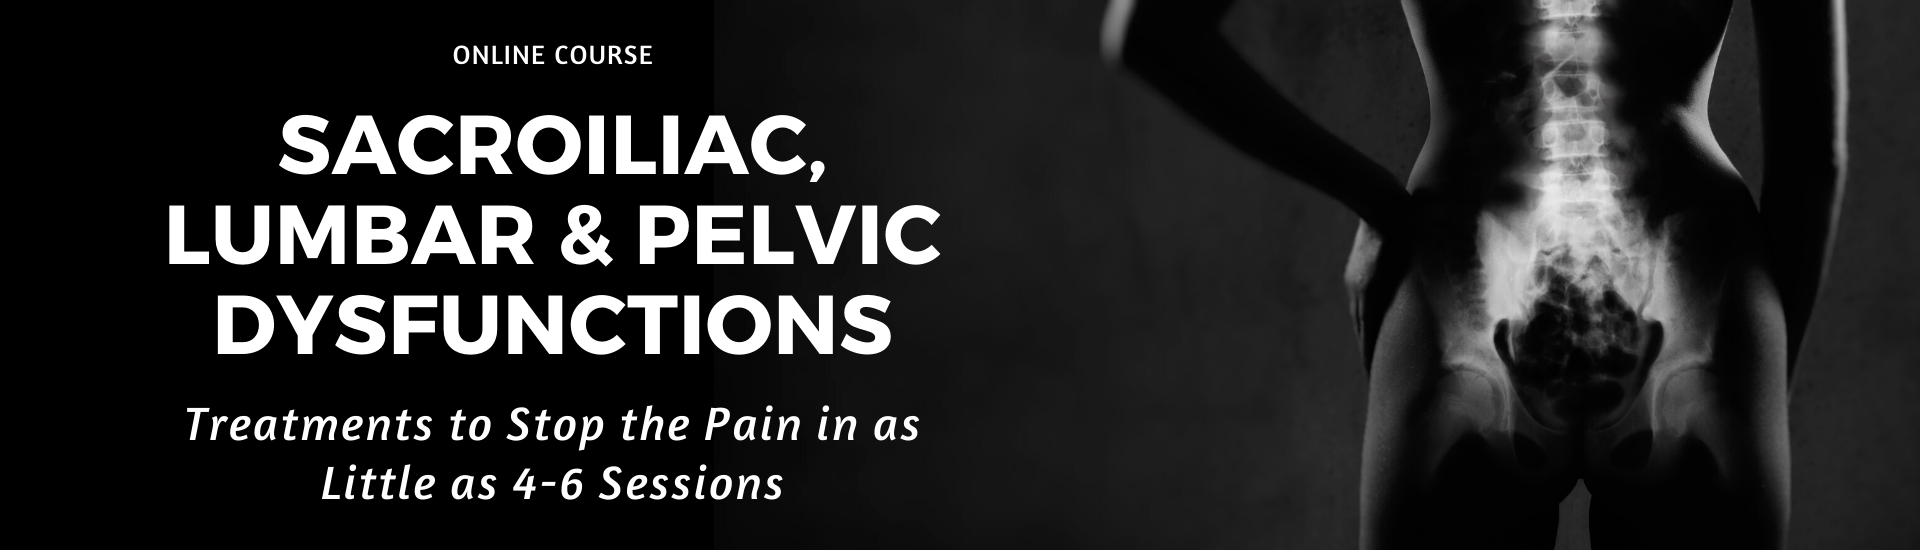 Sacroiliac, Lumbar & Pelvic Dysfunctions: Treatments to Stop the Pain in as Little as 4-6 Sessions